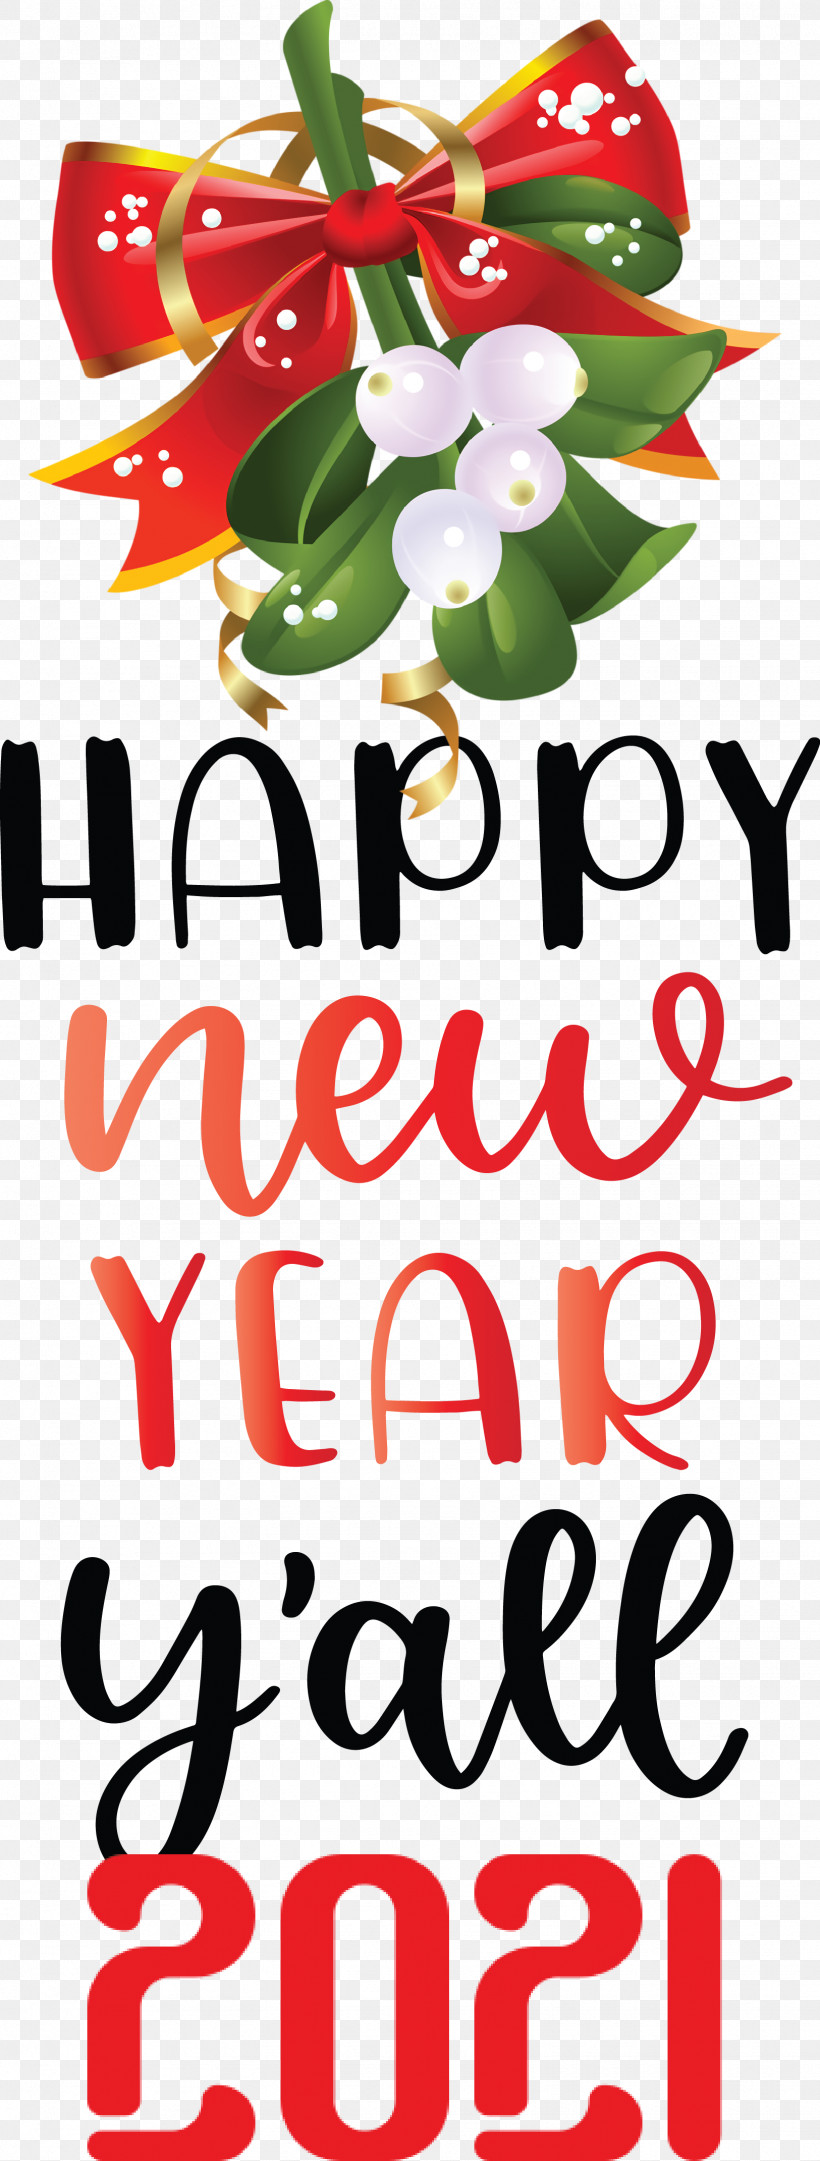 2021 Happy New Year 2021 New Year 2021 Wishes, PNG, 1625x4283px, 2021 Happy New Year, 2021 New Year, 2021 Wishes, Christmas Day, Floral Design Download Free